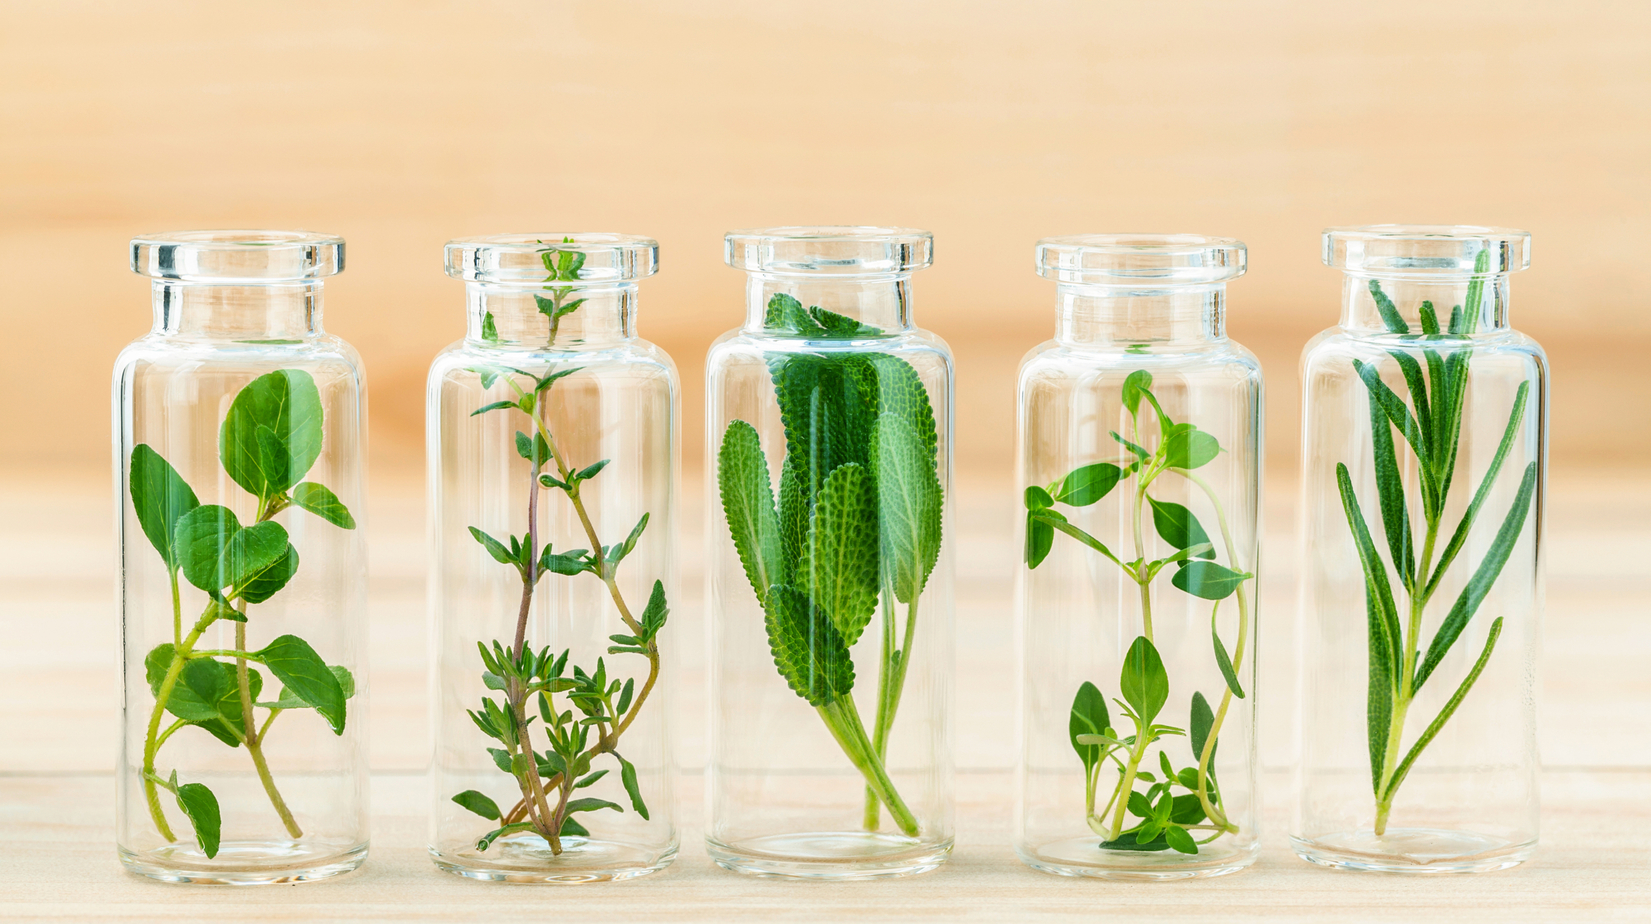 How to use homeopathy? Homeopathy Versus Herbology